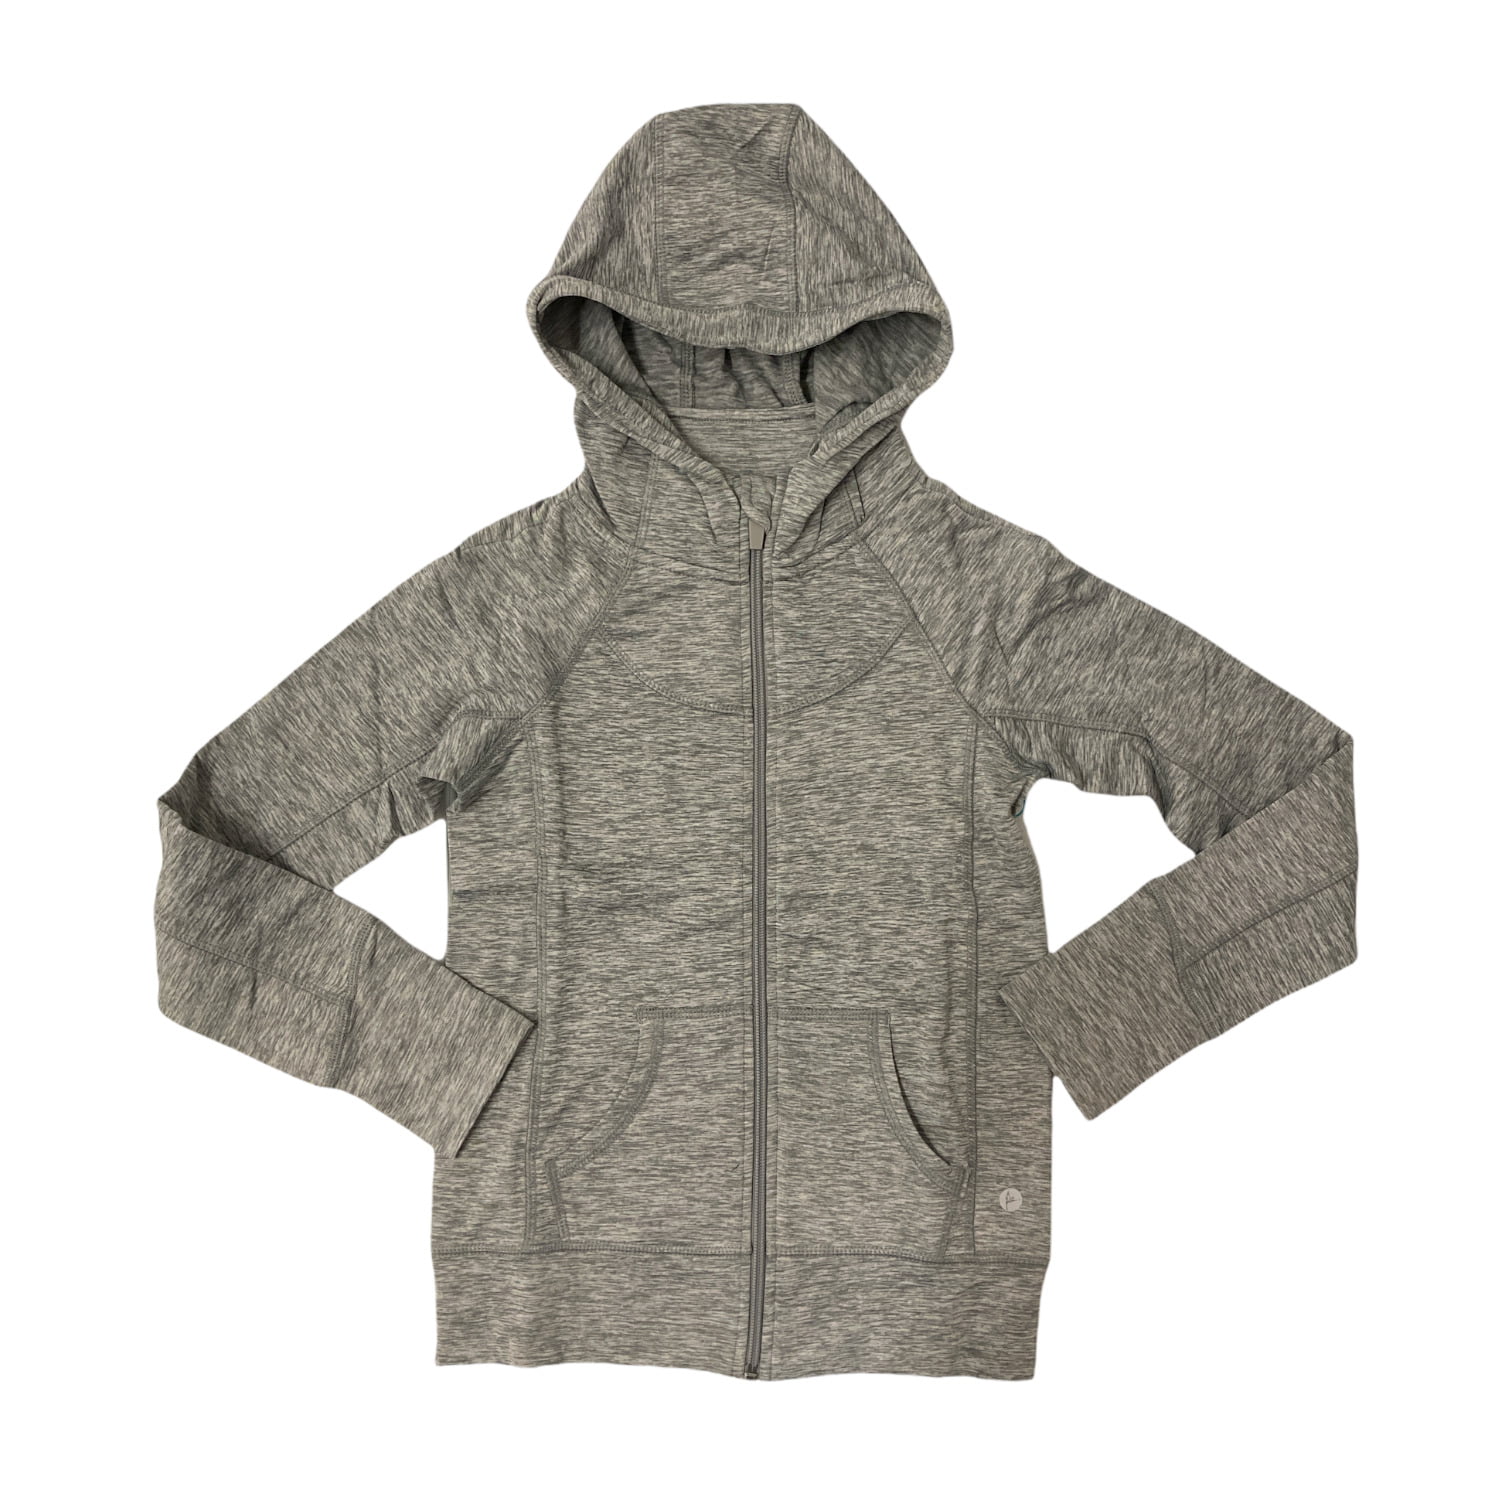 90 Degree by Reflex, Youth Girls, Brushed Inside Hoodie Jacket